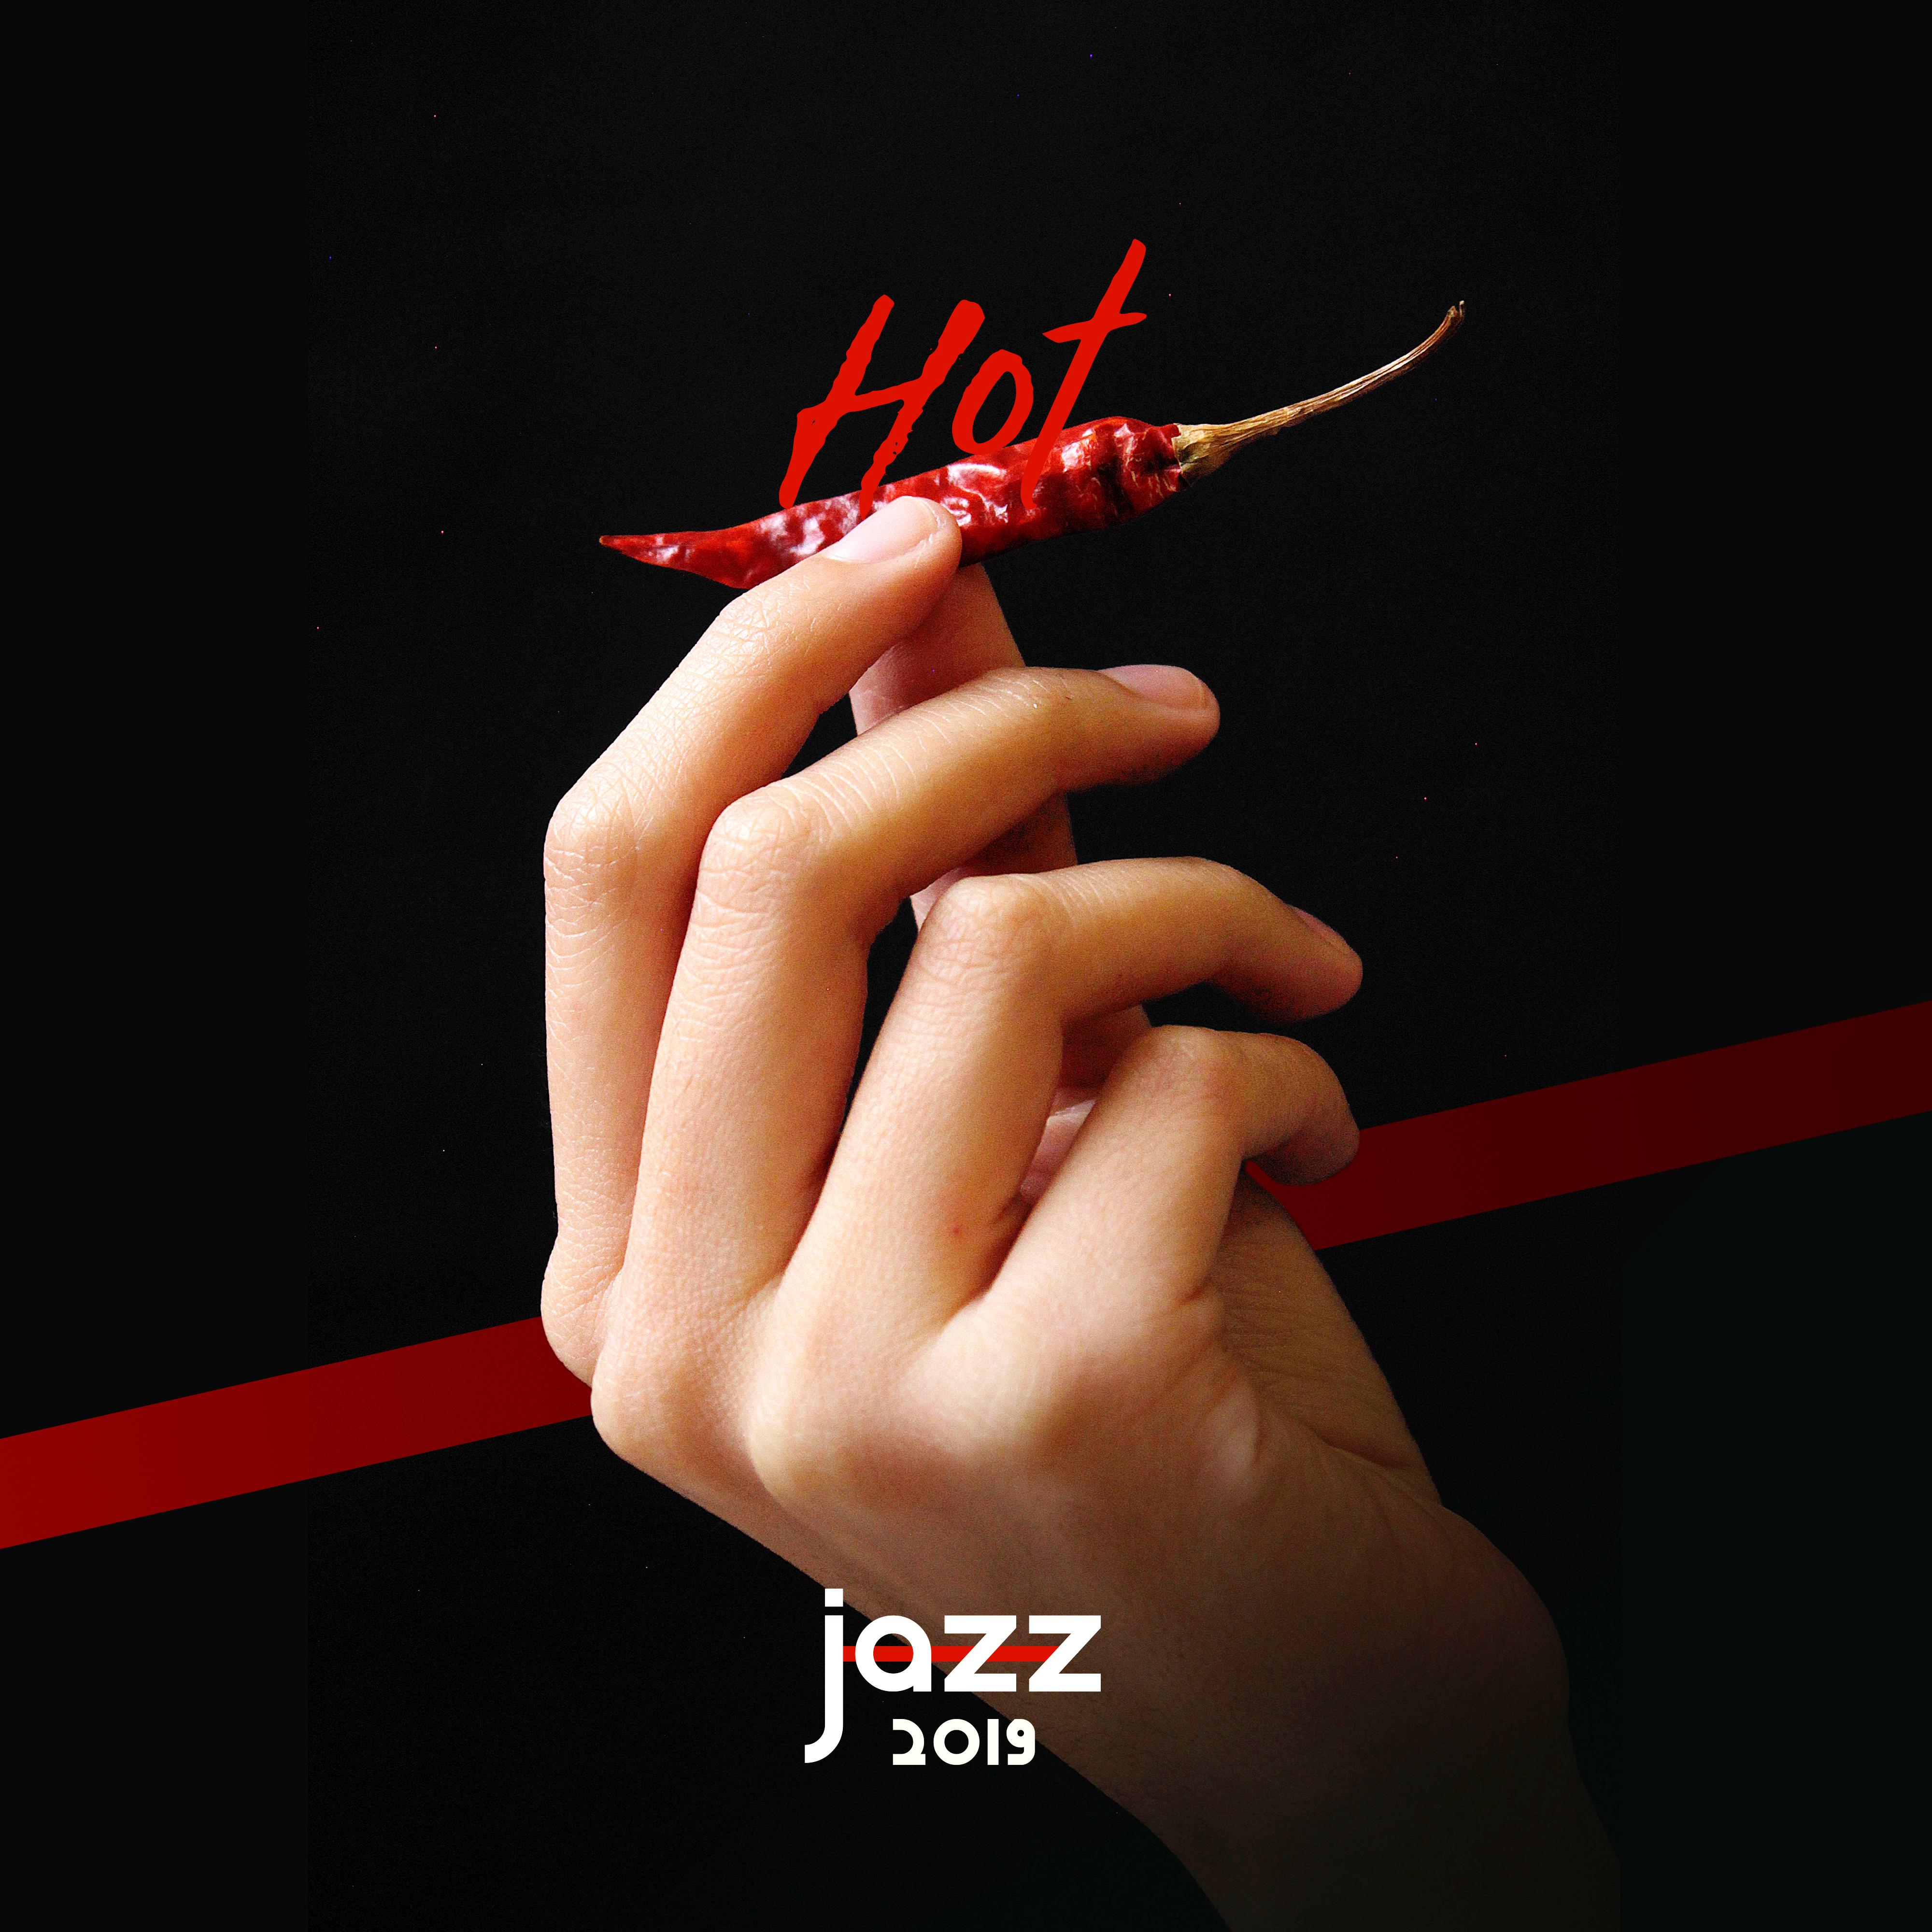 Hot Jazz 2019 – Best Sensual Jazz Music at Night, Smooth Jazz for Lovers, Making Love, Sexy Jazz for Relaxation